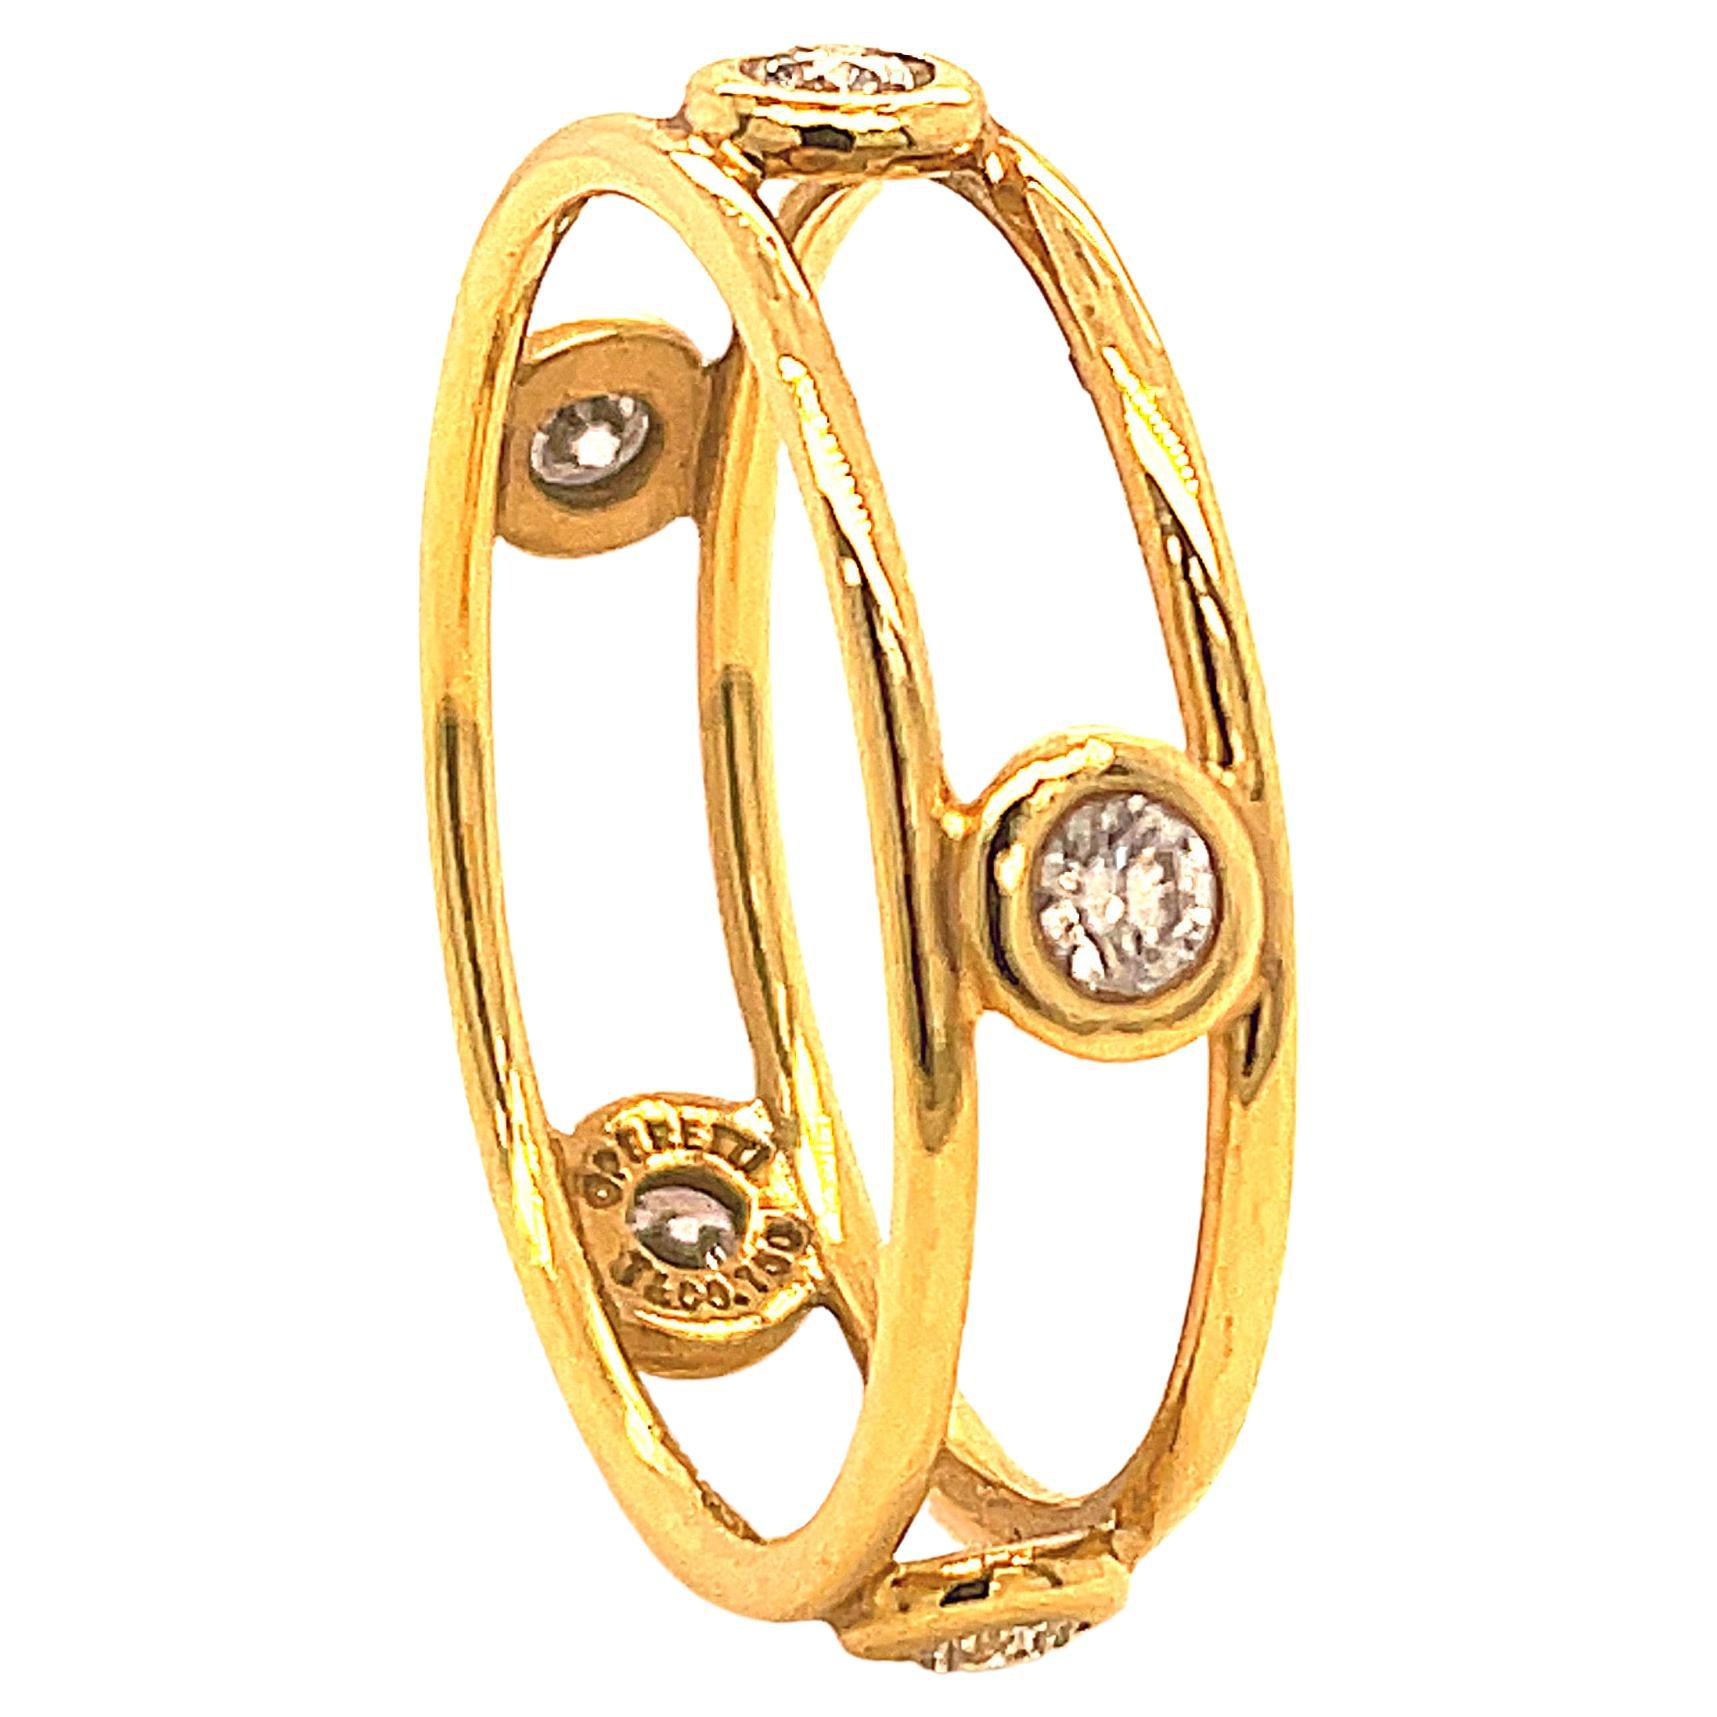 Lovely sparkling band:  two slim bands set with five open-work bezel-set brilliant diamonds.  Made and signed by ELSA PERETTI for TIFFANY & CO.  18K yellow gold.  Size 8 and can be somewhat custom sized.  Bright and wearable.

Alice Kwartler has